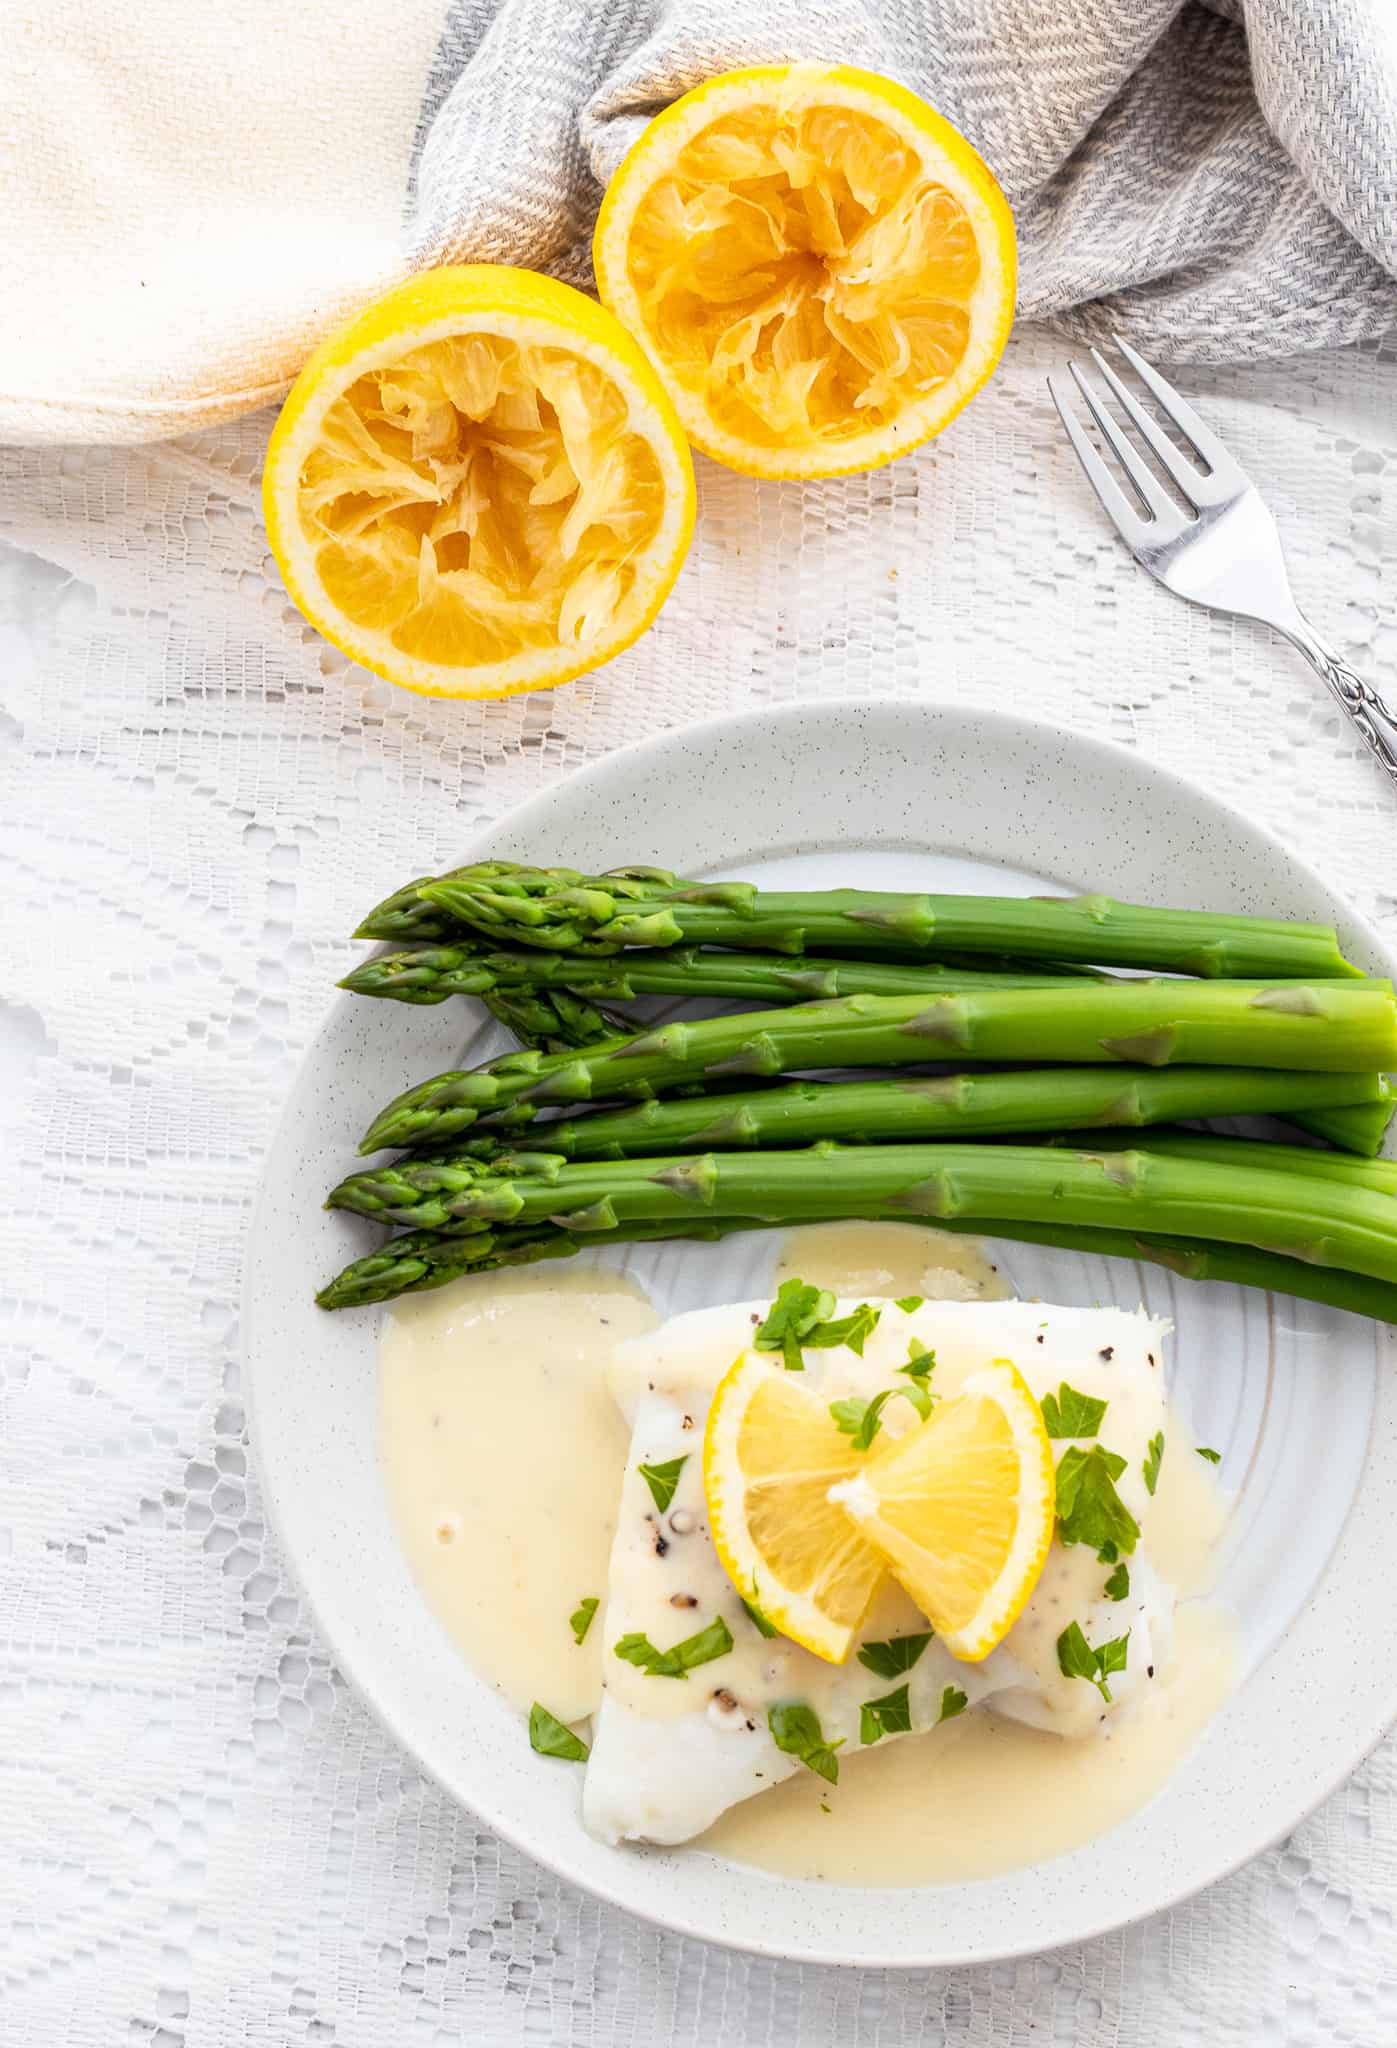 Finished fish recipe with lemon sauce and asparagus